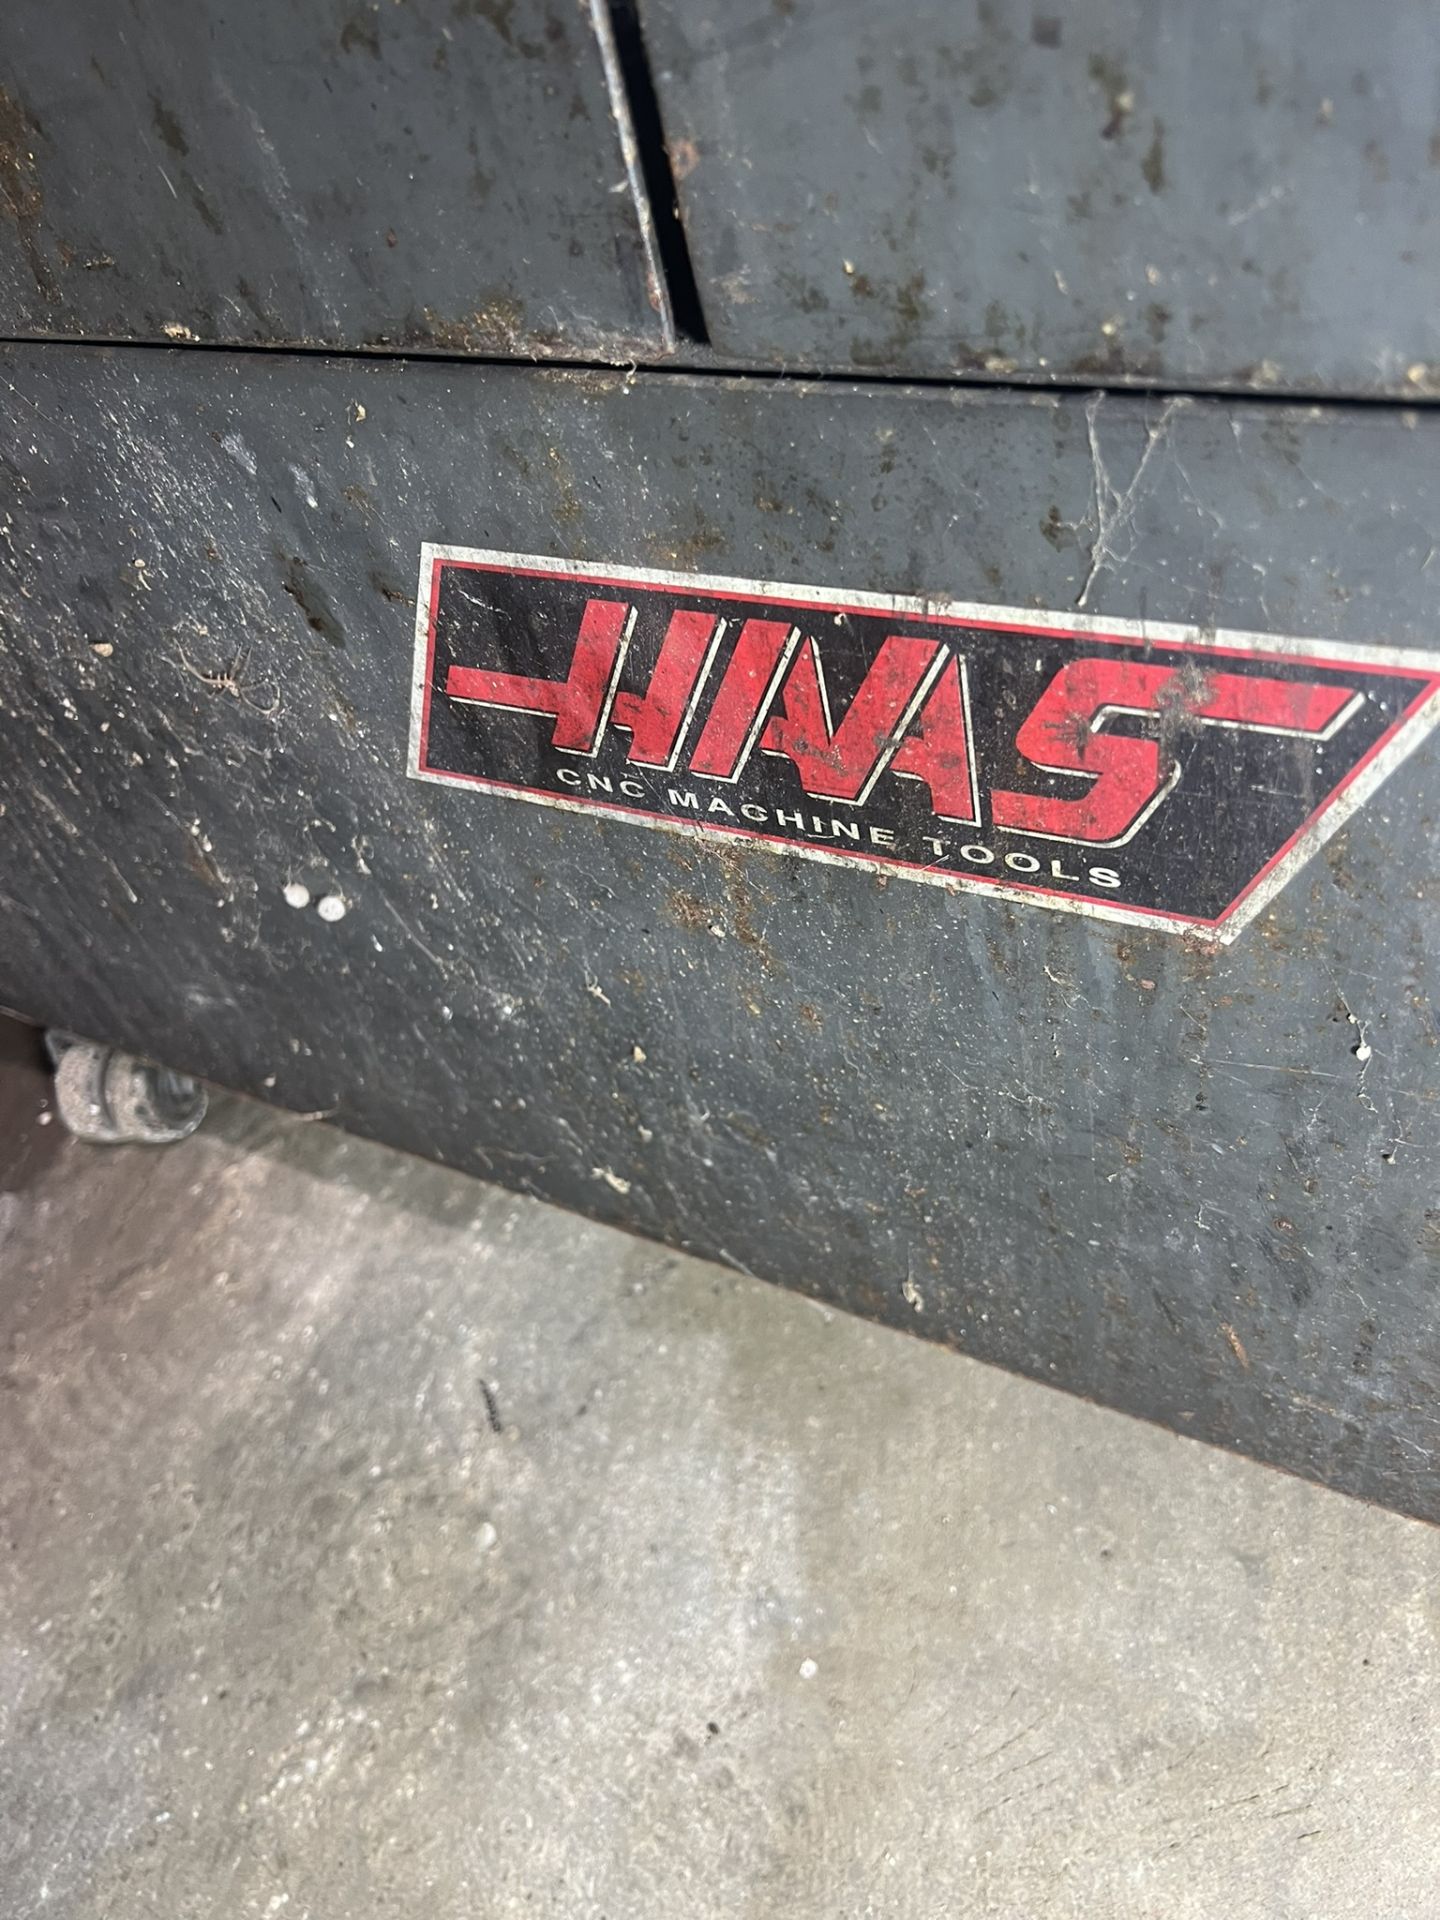 Haas Work Box on Casters - Image 2 of 3